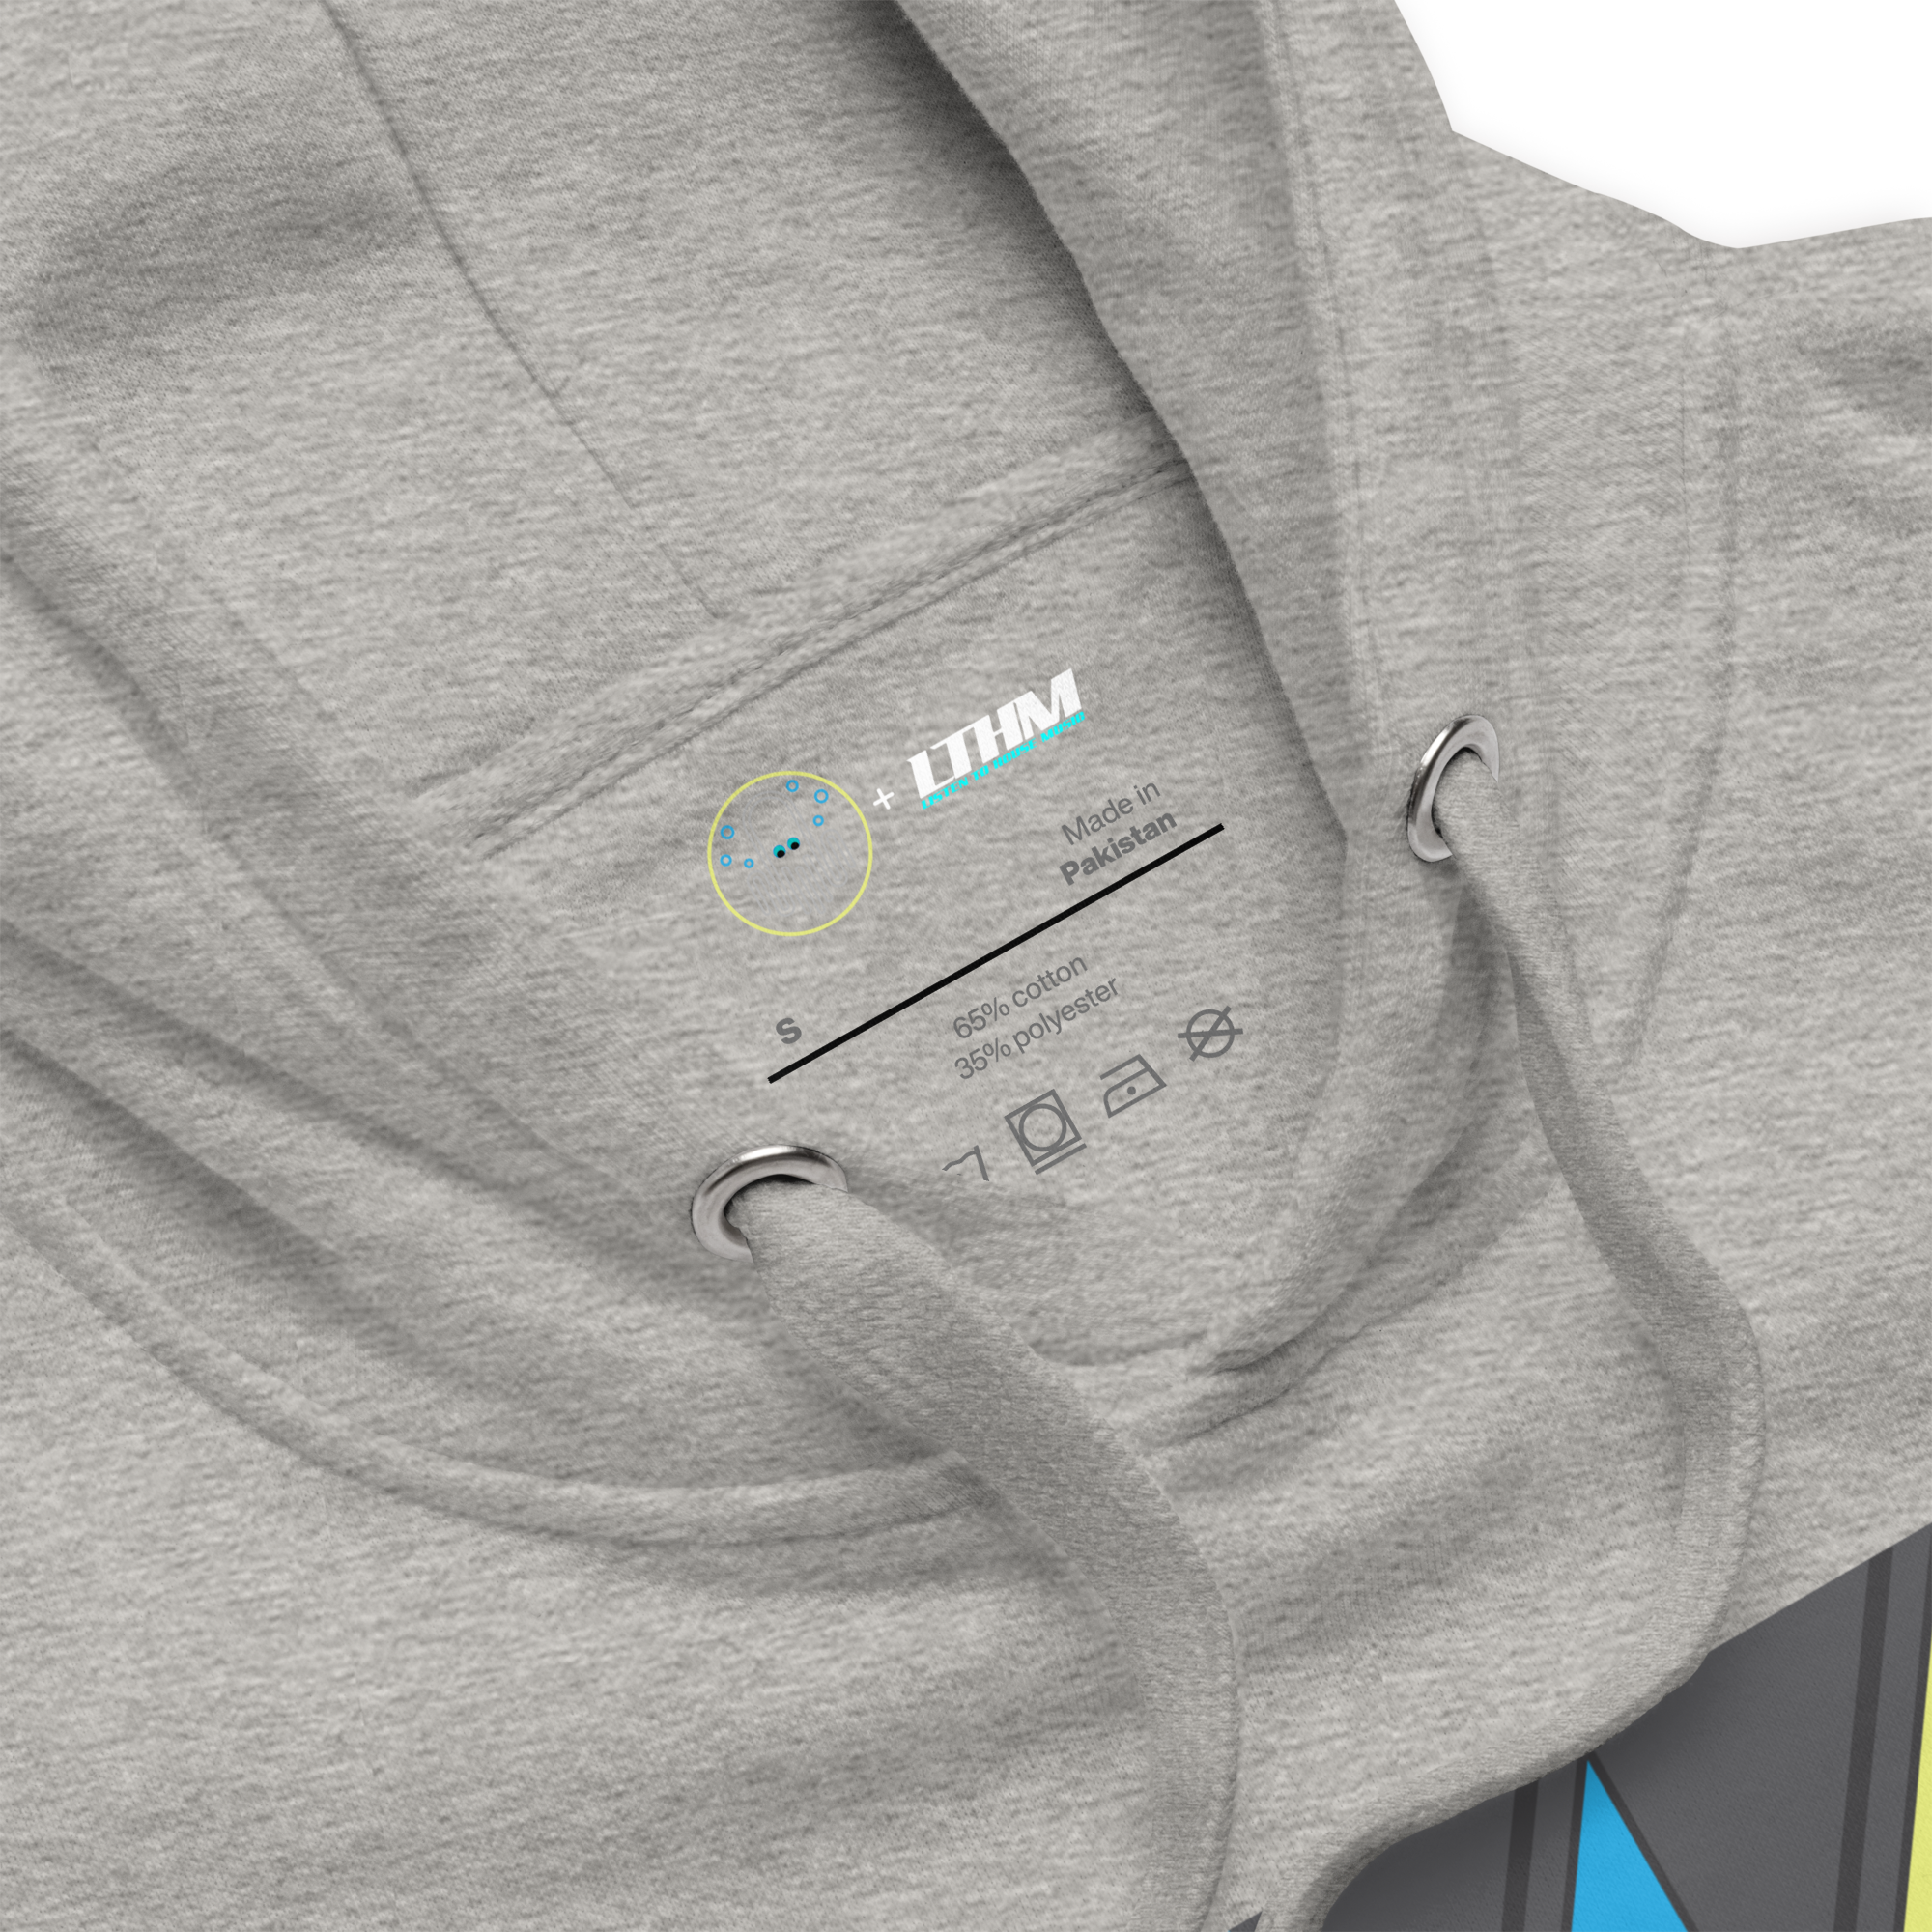 Carbon Grey Think Positive Graphic Hoodie Zoom View of Hood and Inside Label